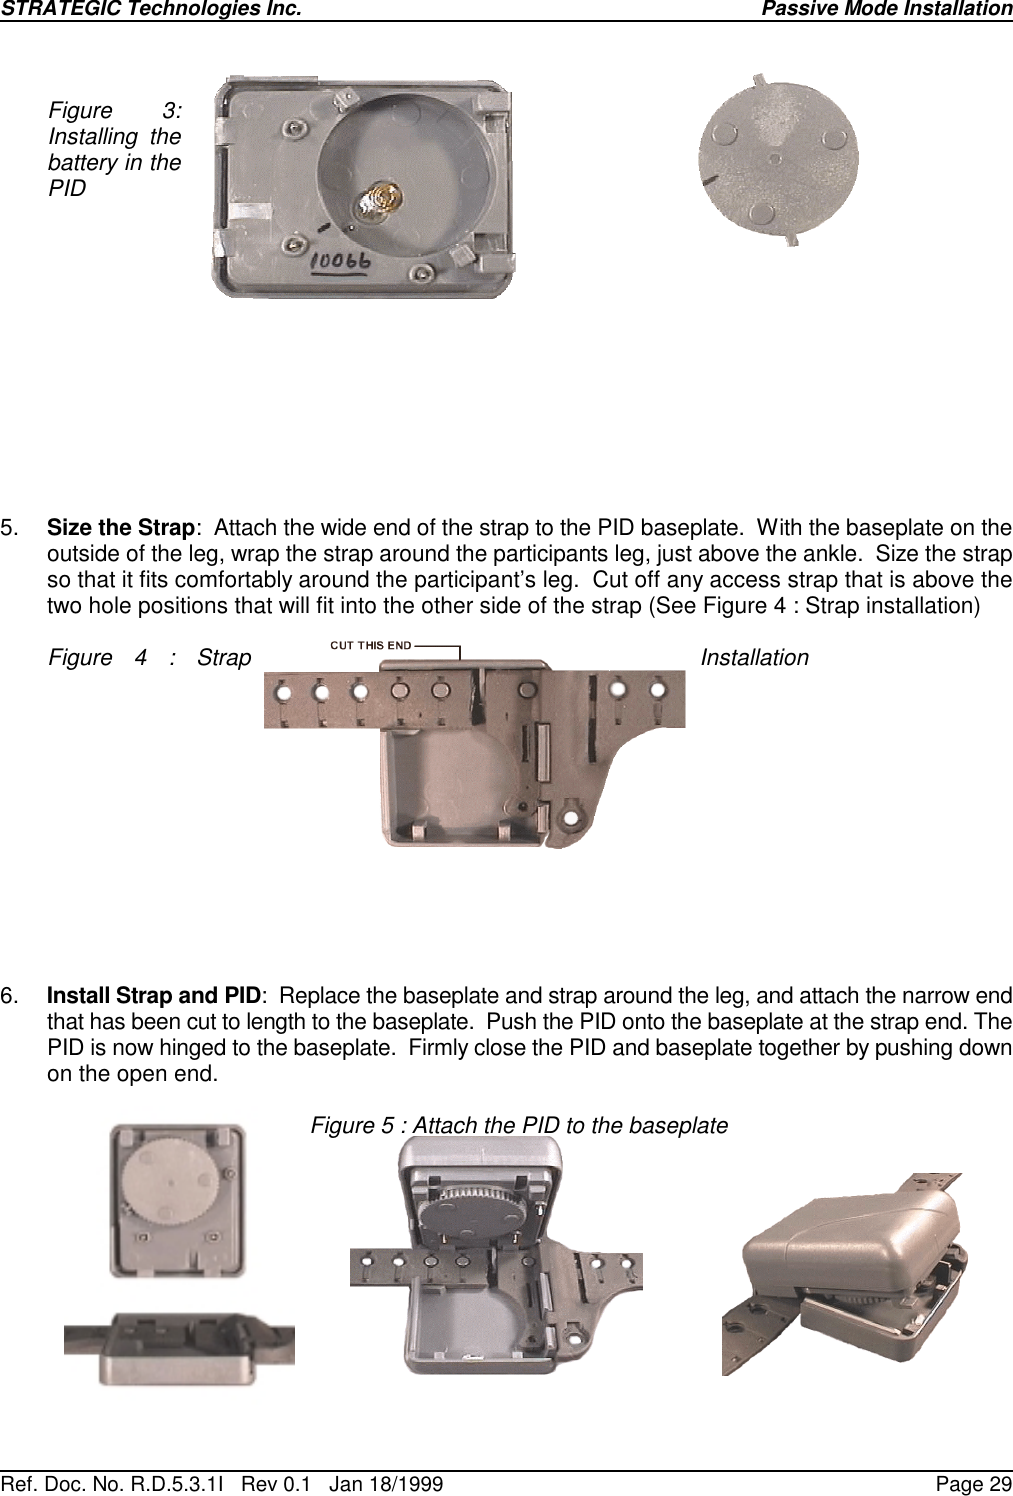 STRATEGIC Technologies Inc.Ref. Doc. No. R.D.5.3.1I   Rev 0.1   Jan 18/1999Passive Mode InstallationPage 29Figure 3:Installing thebattery in thePID5. Size the Strap:  Attach the wide end of the strap to the PID baseplate.  With the baseplate on theoutside of the leg, wrap the strap around the participants leg, just above the ankle.  Size the strapso that it fits comfortably around the participant’s leg.  Cut off any access strap that is above thetwo hole positions that will fit into the other side of the strap (See Figure 4 : Strap installation)Figure 4 : Strap Installation6. Install Strap and PID:  Replace the baseplate and strap around the leg, and attach the narrow endthat has been cut to length to the baseplate.  Push the PID onto the baseplate at the strap end. ThePID is now hinged to the baseplate.  Firmly close the PID and baseplate together by pushing downon the open end.Figure 5 : Attach the PID to the baseplate